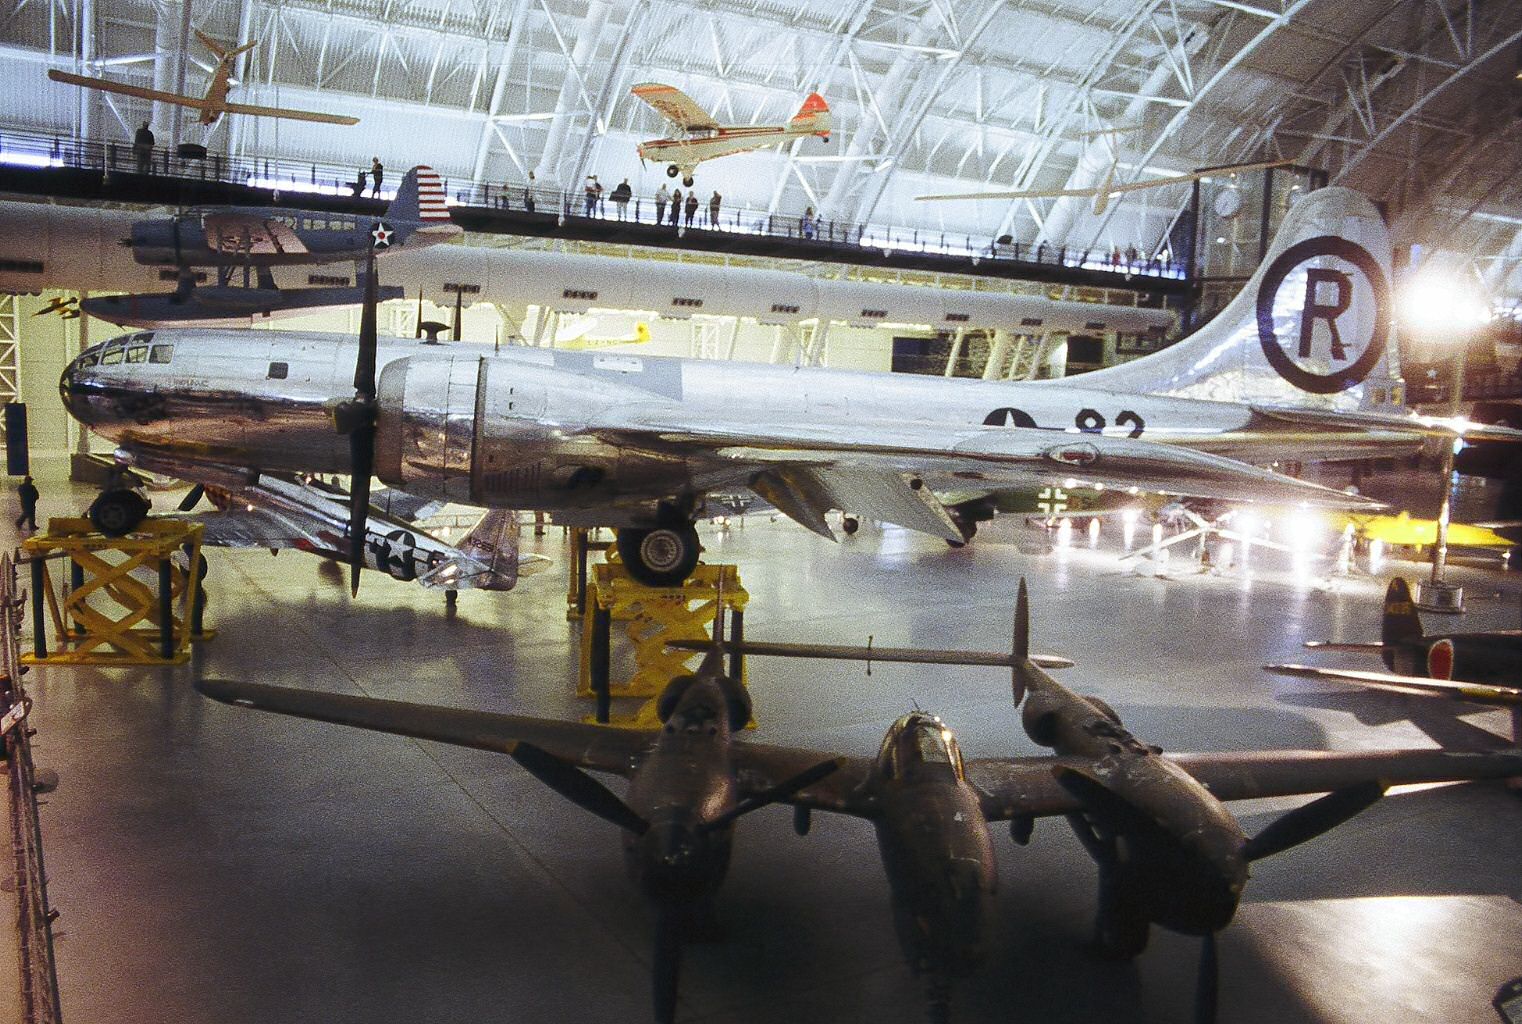 pictures of the enola gay plane